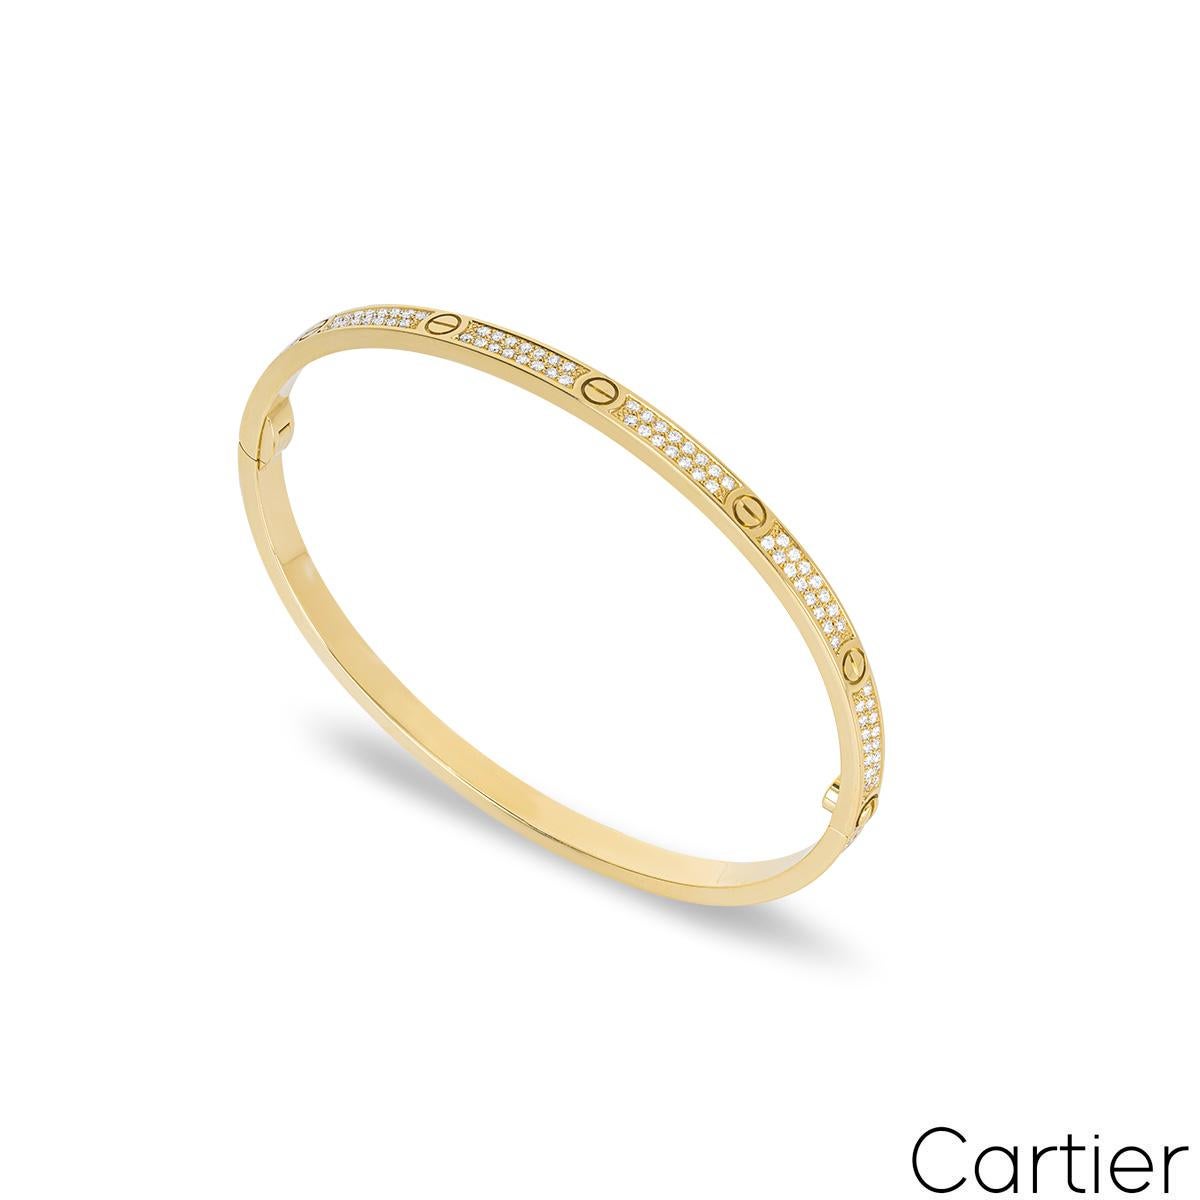 A stunning 18k yellow gold diamond Cartier bracelet from the Love collection. The bracelet comprises of the iconic screw motifs around the outer edge complemented with 177 round brilliant cut pave set diamonds in between. The diamonds have a total